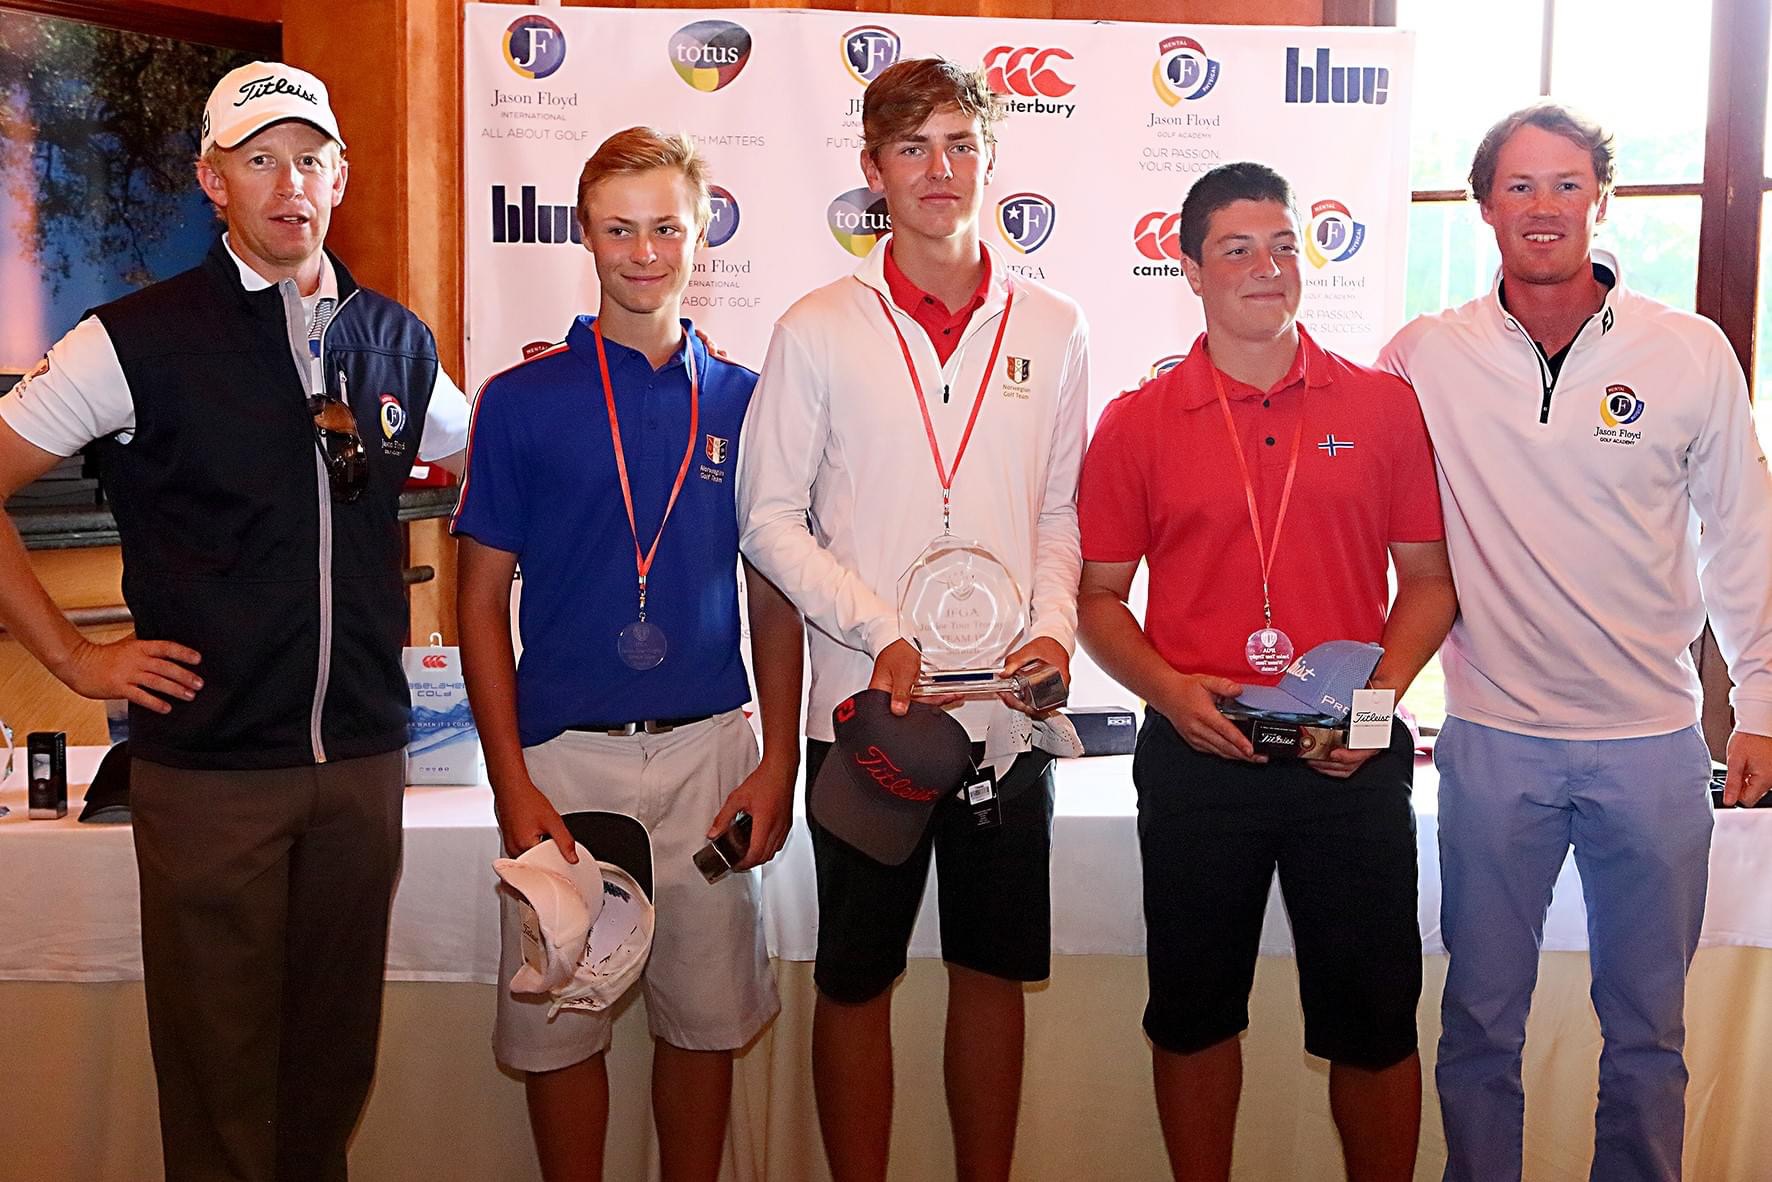 Viktor Hovland (second right) pictured with the 2nd and 3rd place winners in the 2014 Triple A World Junior Golf Series. Also pictured is Jason Floyd (left), founder of the WAGR Triple A World Junior Golf Series.